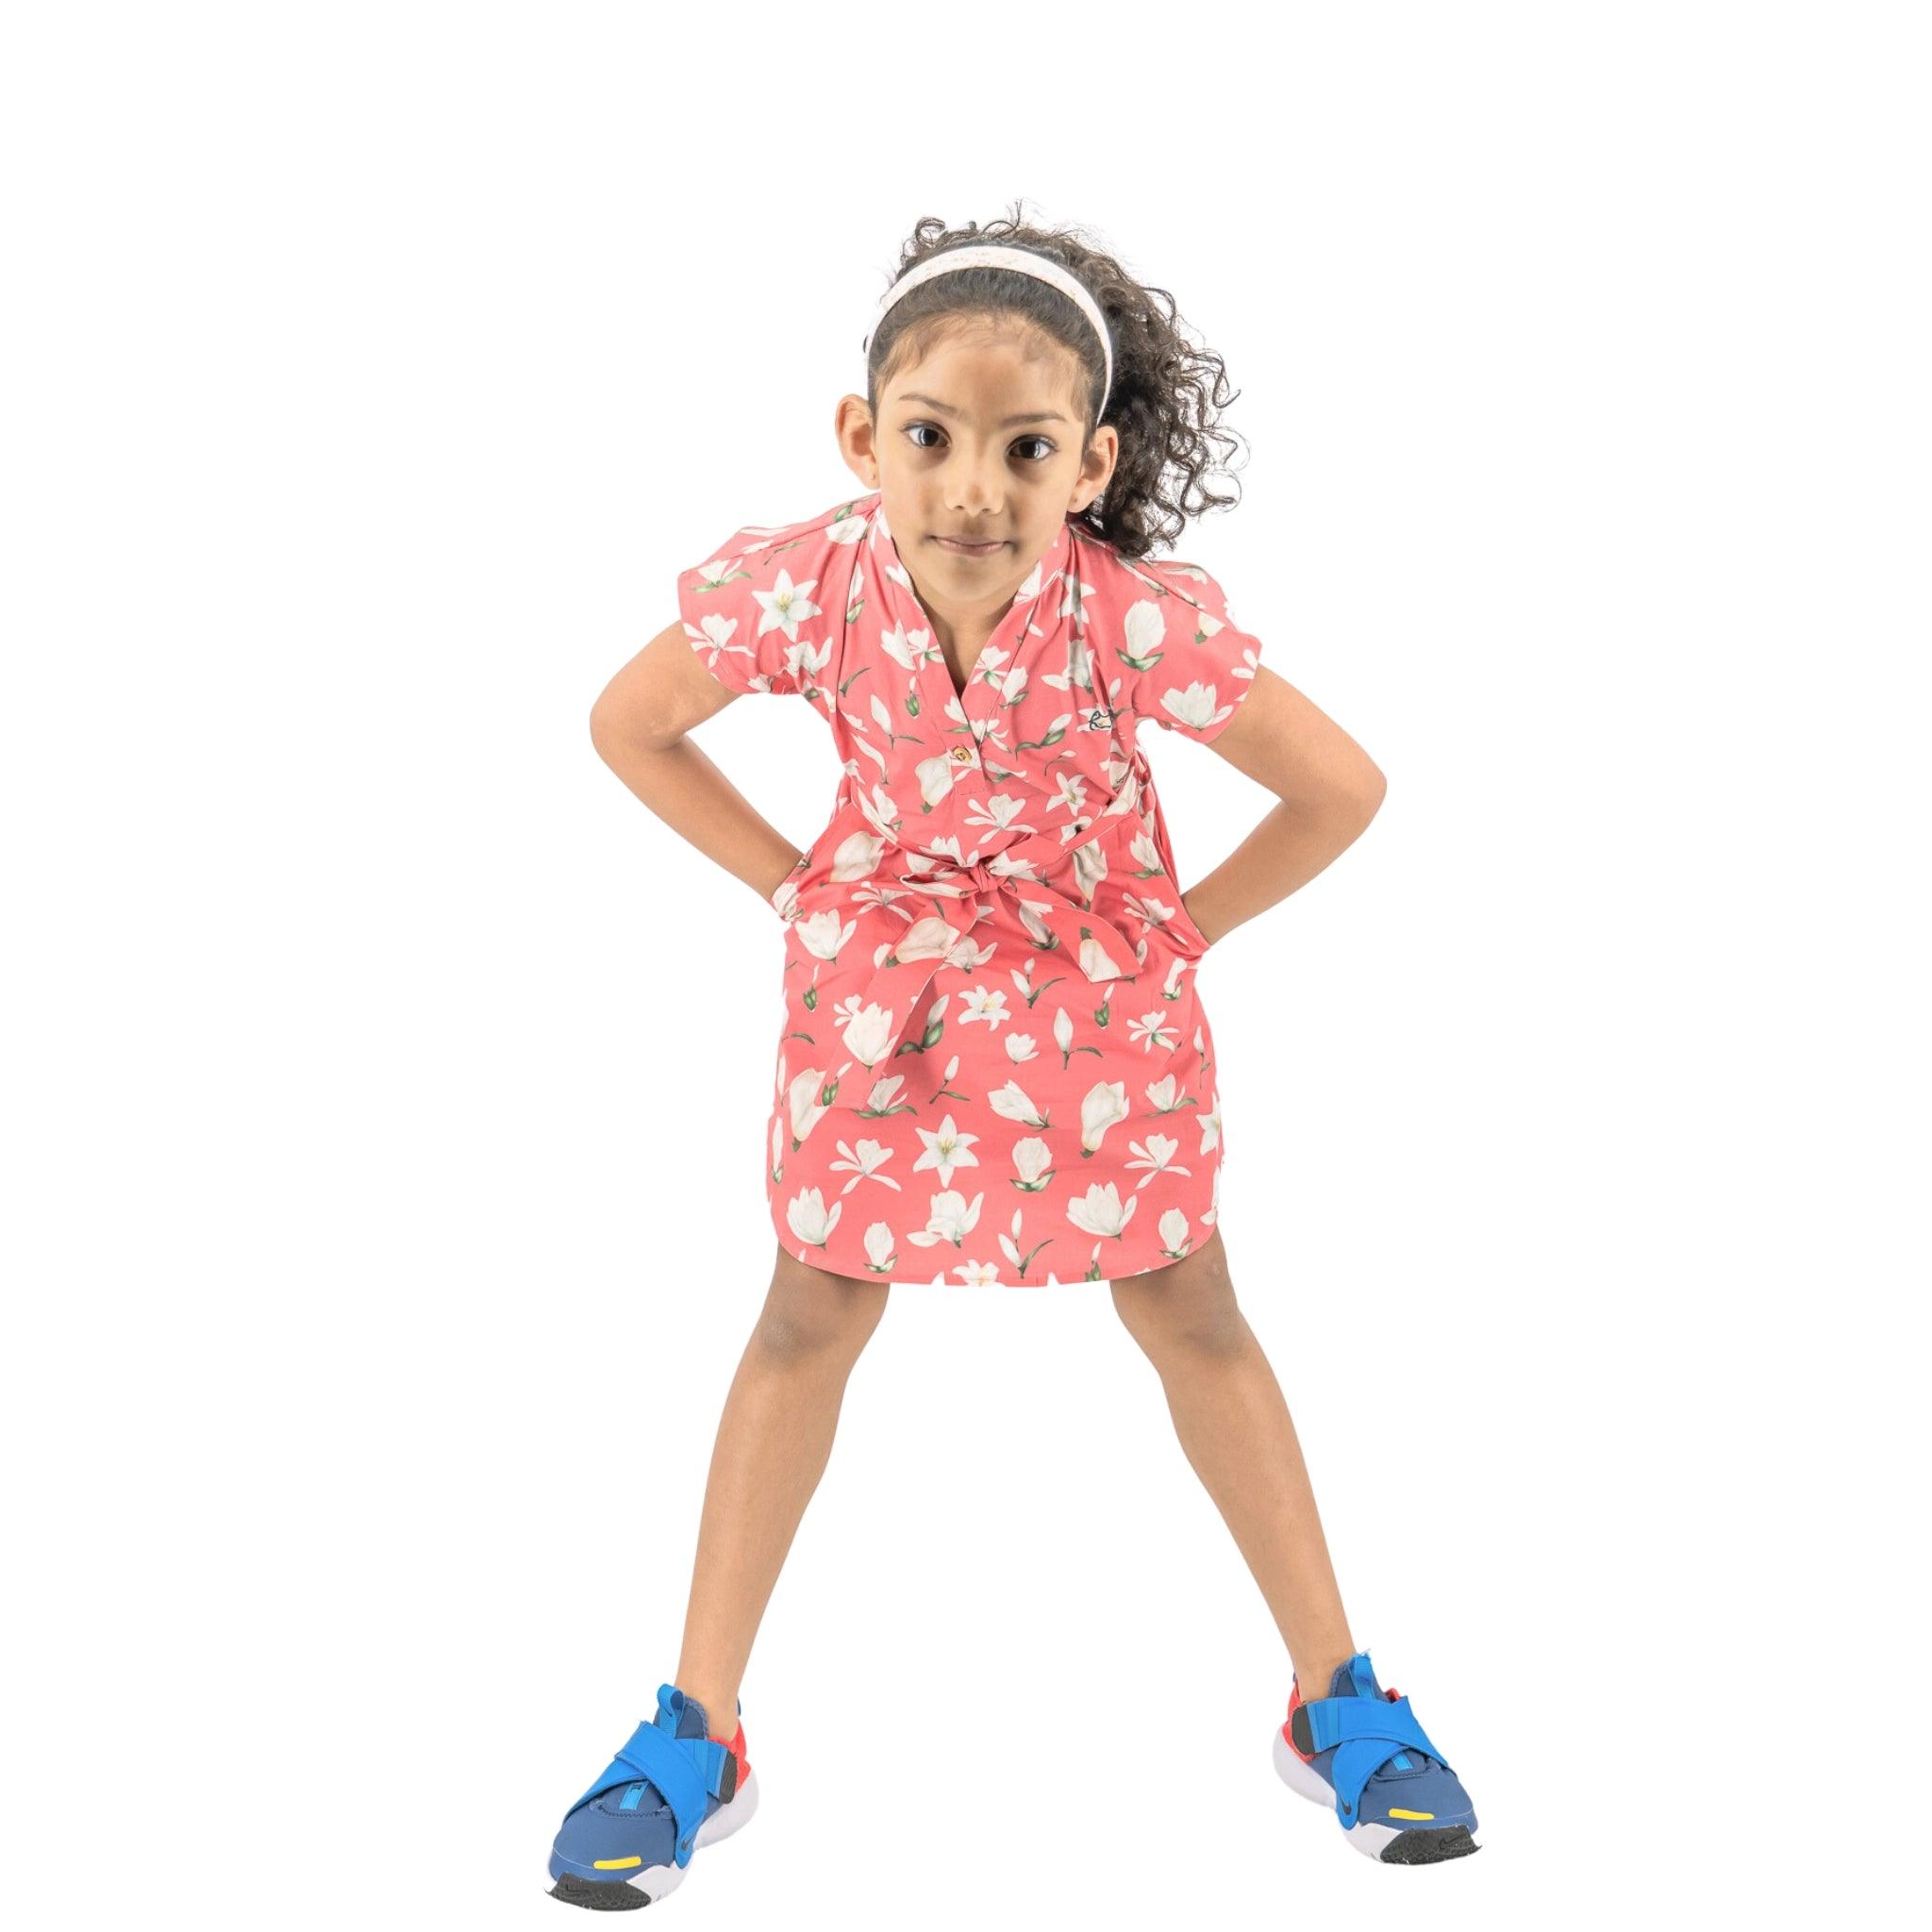 A young girl standing with hands on hips, wearing a Karee Mineral Red Lilly Blossom Cotton Shirt Dress and blue sneakers, looking at the camera with a slight frown on a white background.